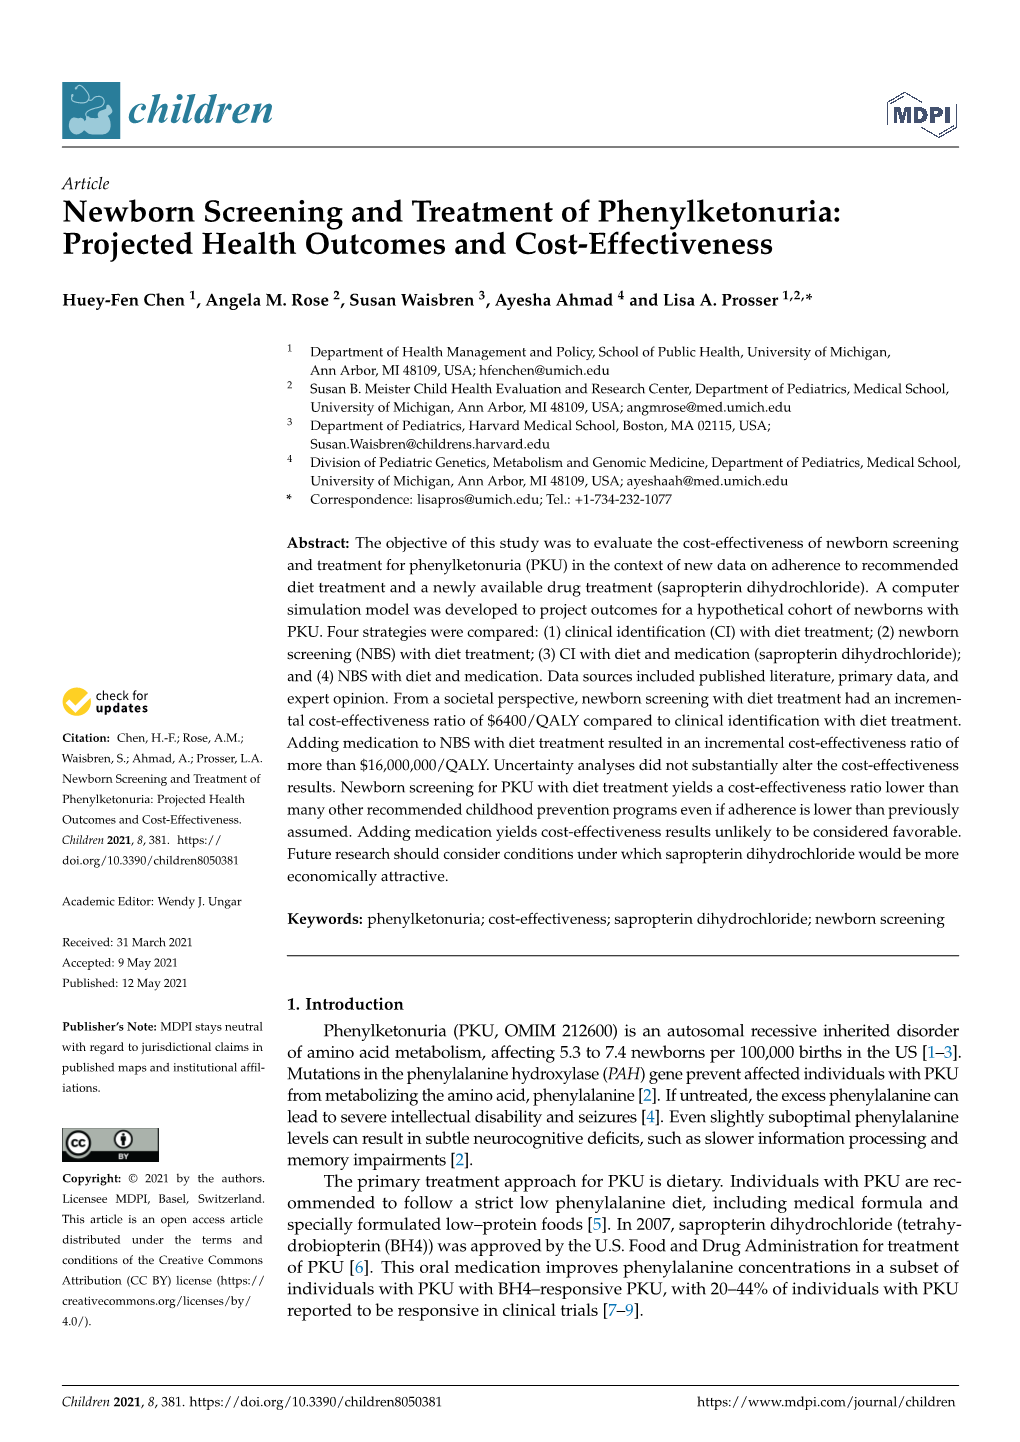 Newborn Screening and Treatment of Phenylketonuria: Projected Health Outcomes and Cost-Effectiveness